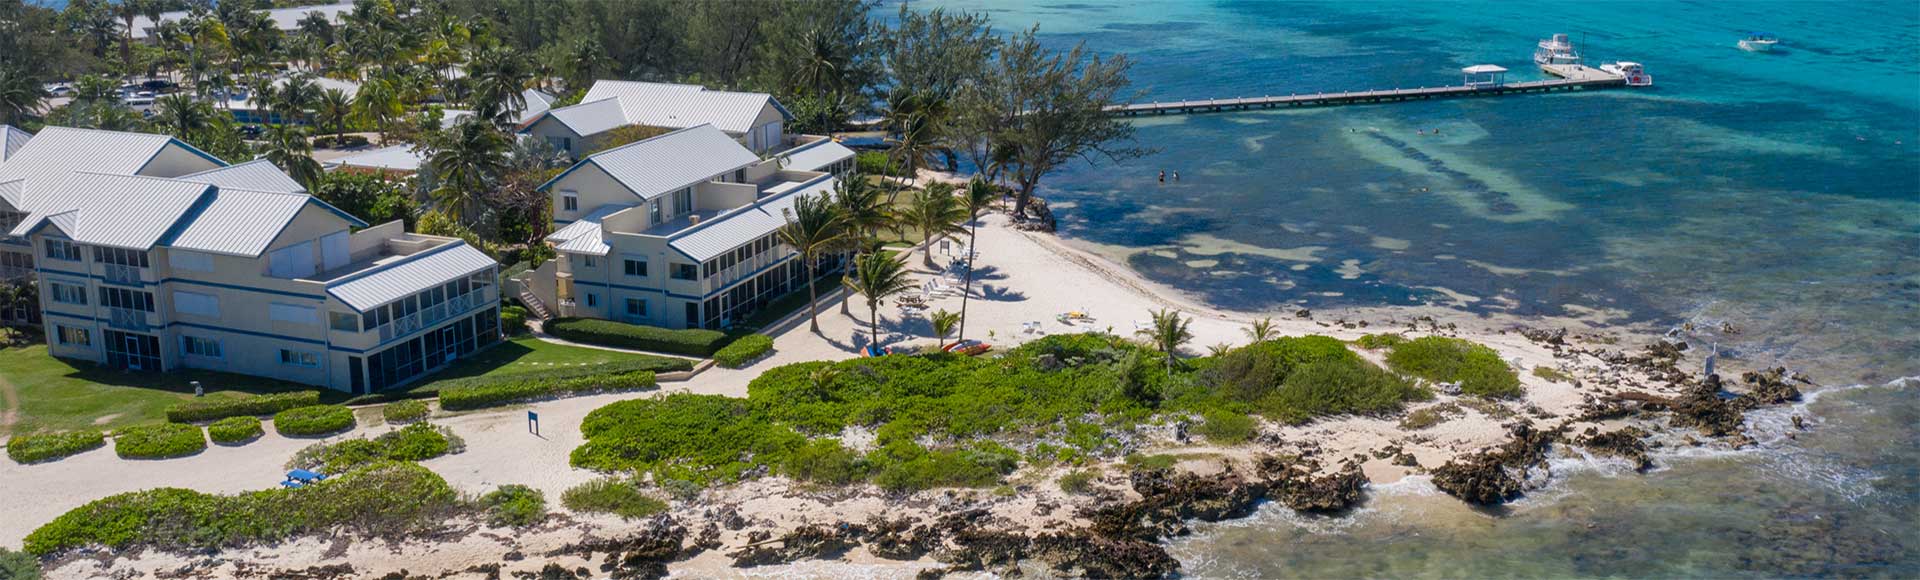 Rum Point Retreat in the Cayman Islands